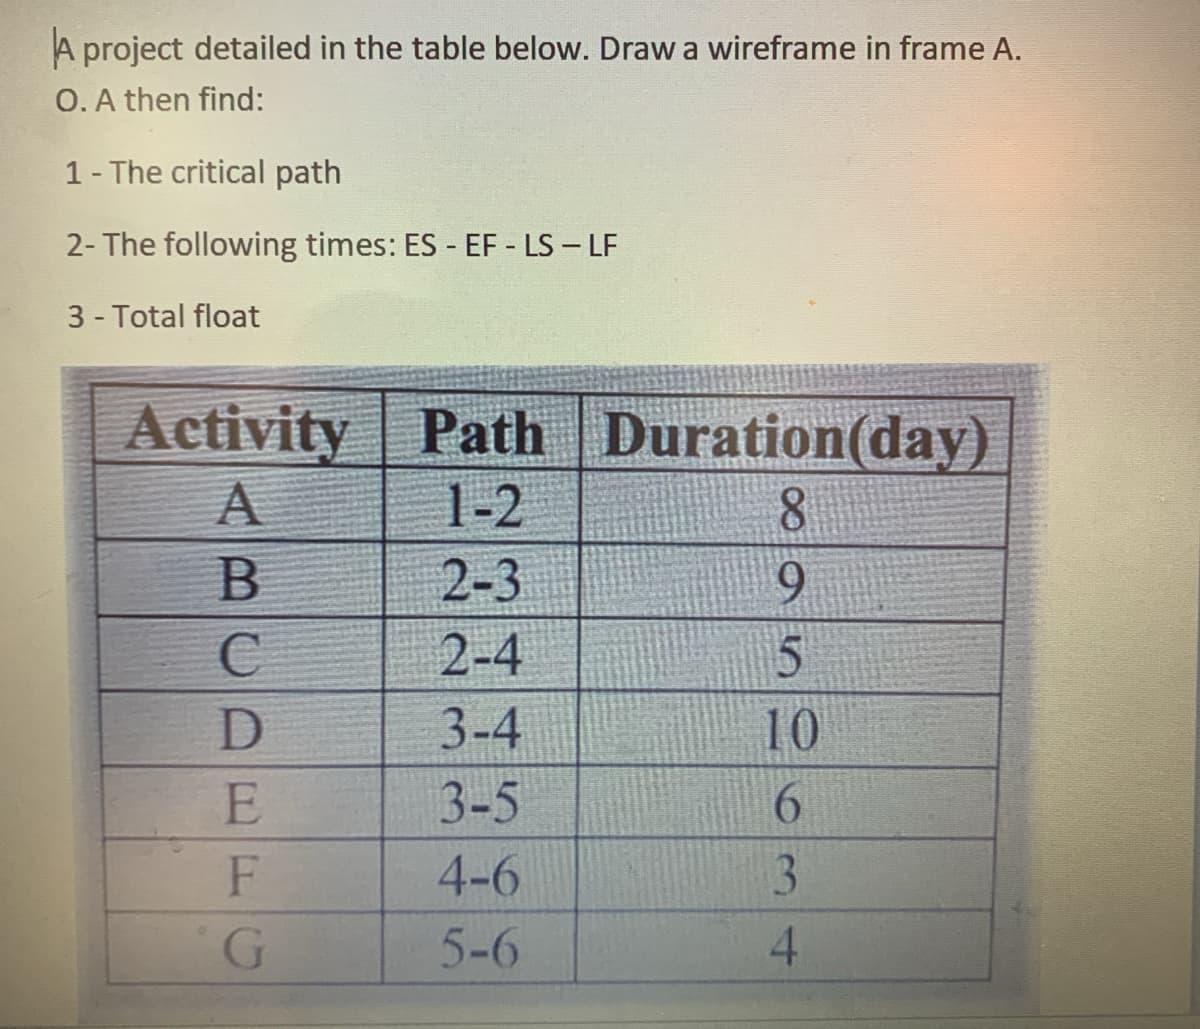 A project detailed in the table below. Draw a wireframe in frame A.
O. A then find:
1- The critical path
2- The following times: ES EF - LS - LF
3 - Total float
Activity Path Duration(day)
A
1-2
8.
2-3
9.
2-4
3-4
10
3-5
9.
4-6
3.
5-6
4.
